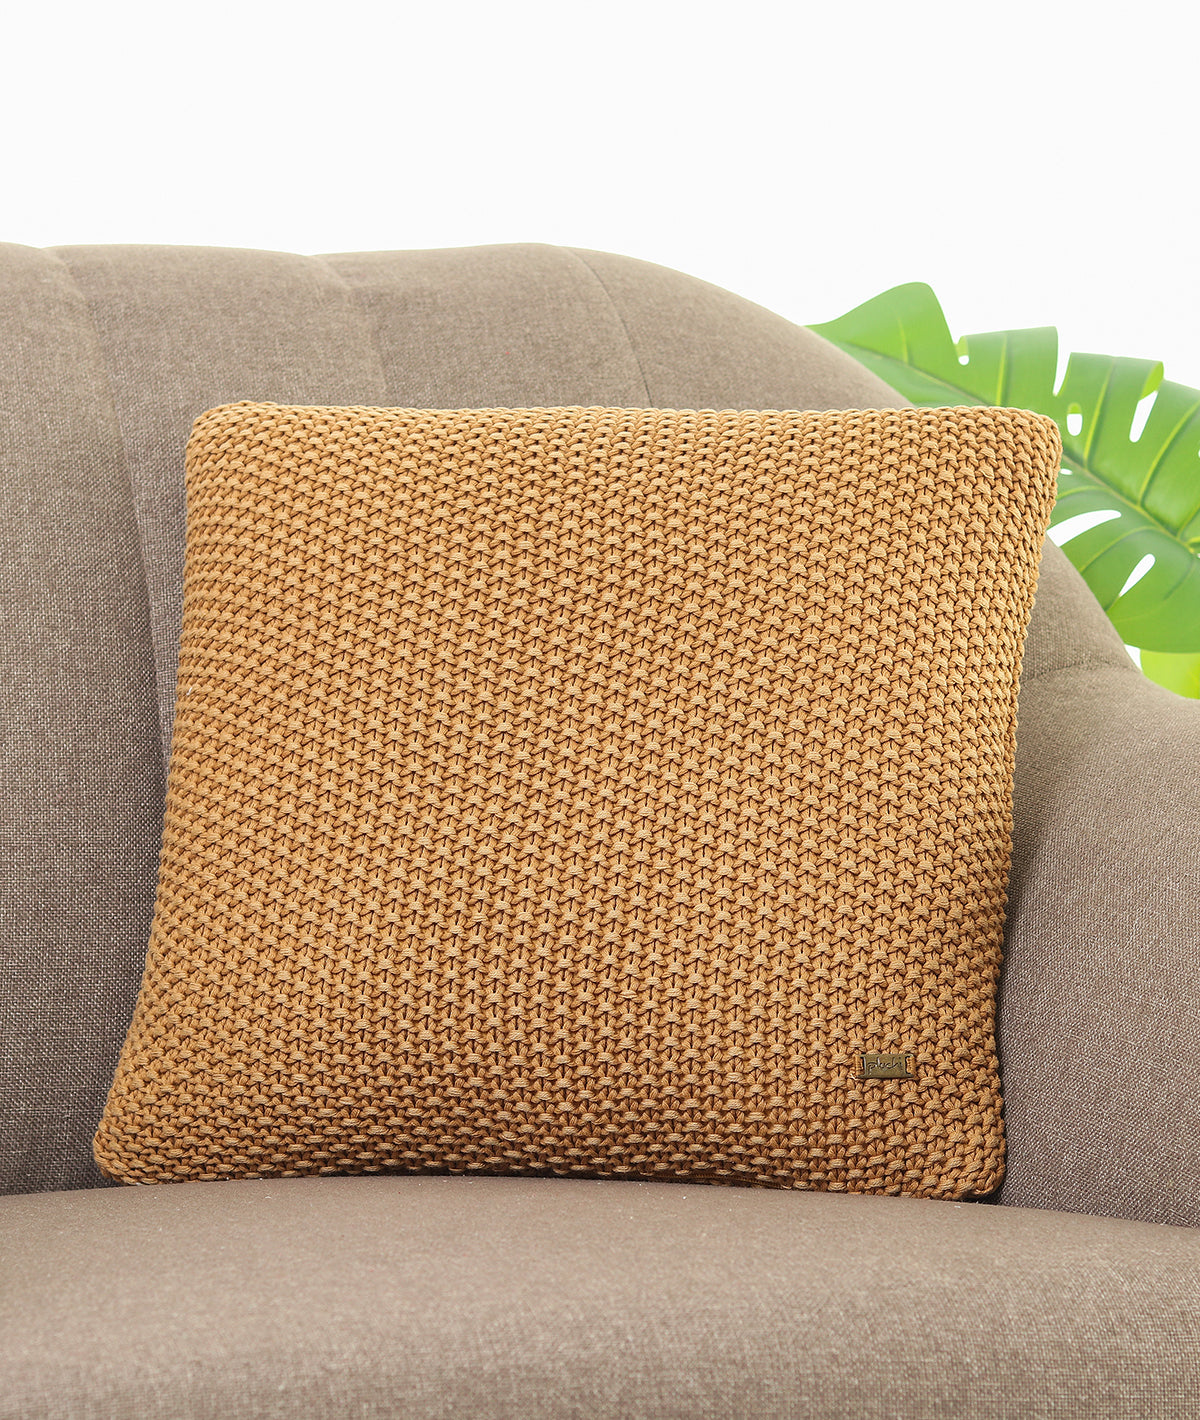 Moss Knit Mustard Cotton Knitted Decorative 16 X 16 Inches Cushion Cover